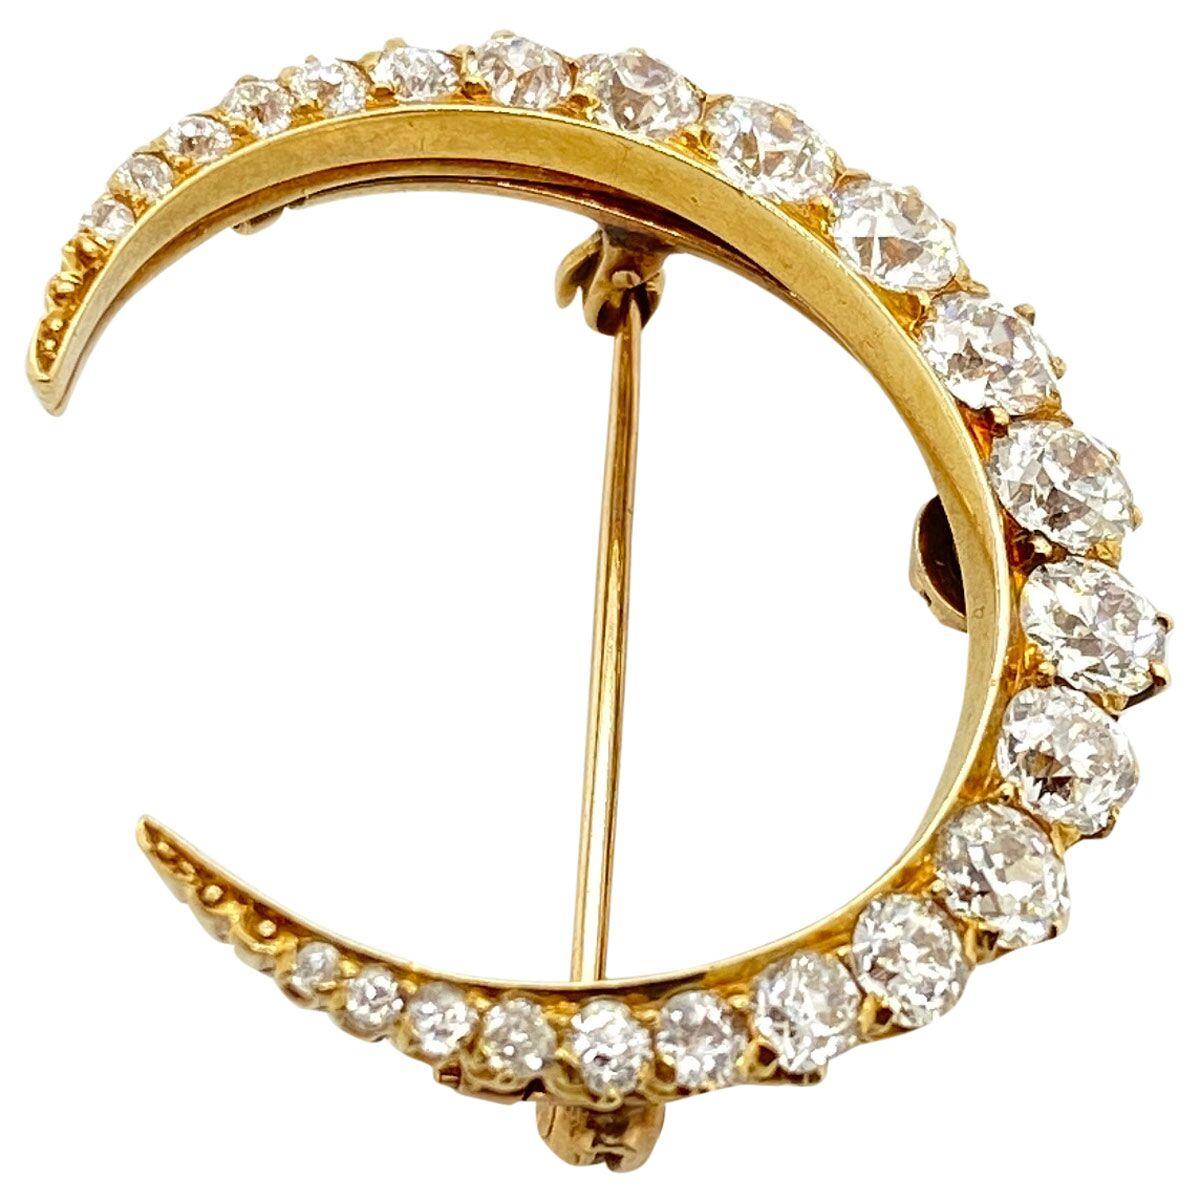 Wow! Just WOW! This crescent pin is outstanding - the diamonds are so bright and lively it's hard to take your eyes off them. This pin dates back to the early 1900's and is from the prestigious New York jewellery house of Schumann Sons. The crescent